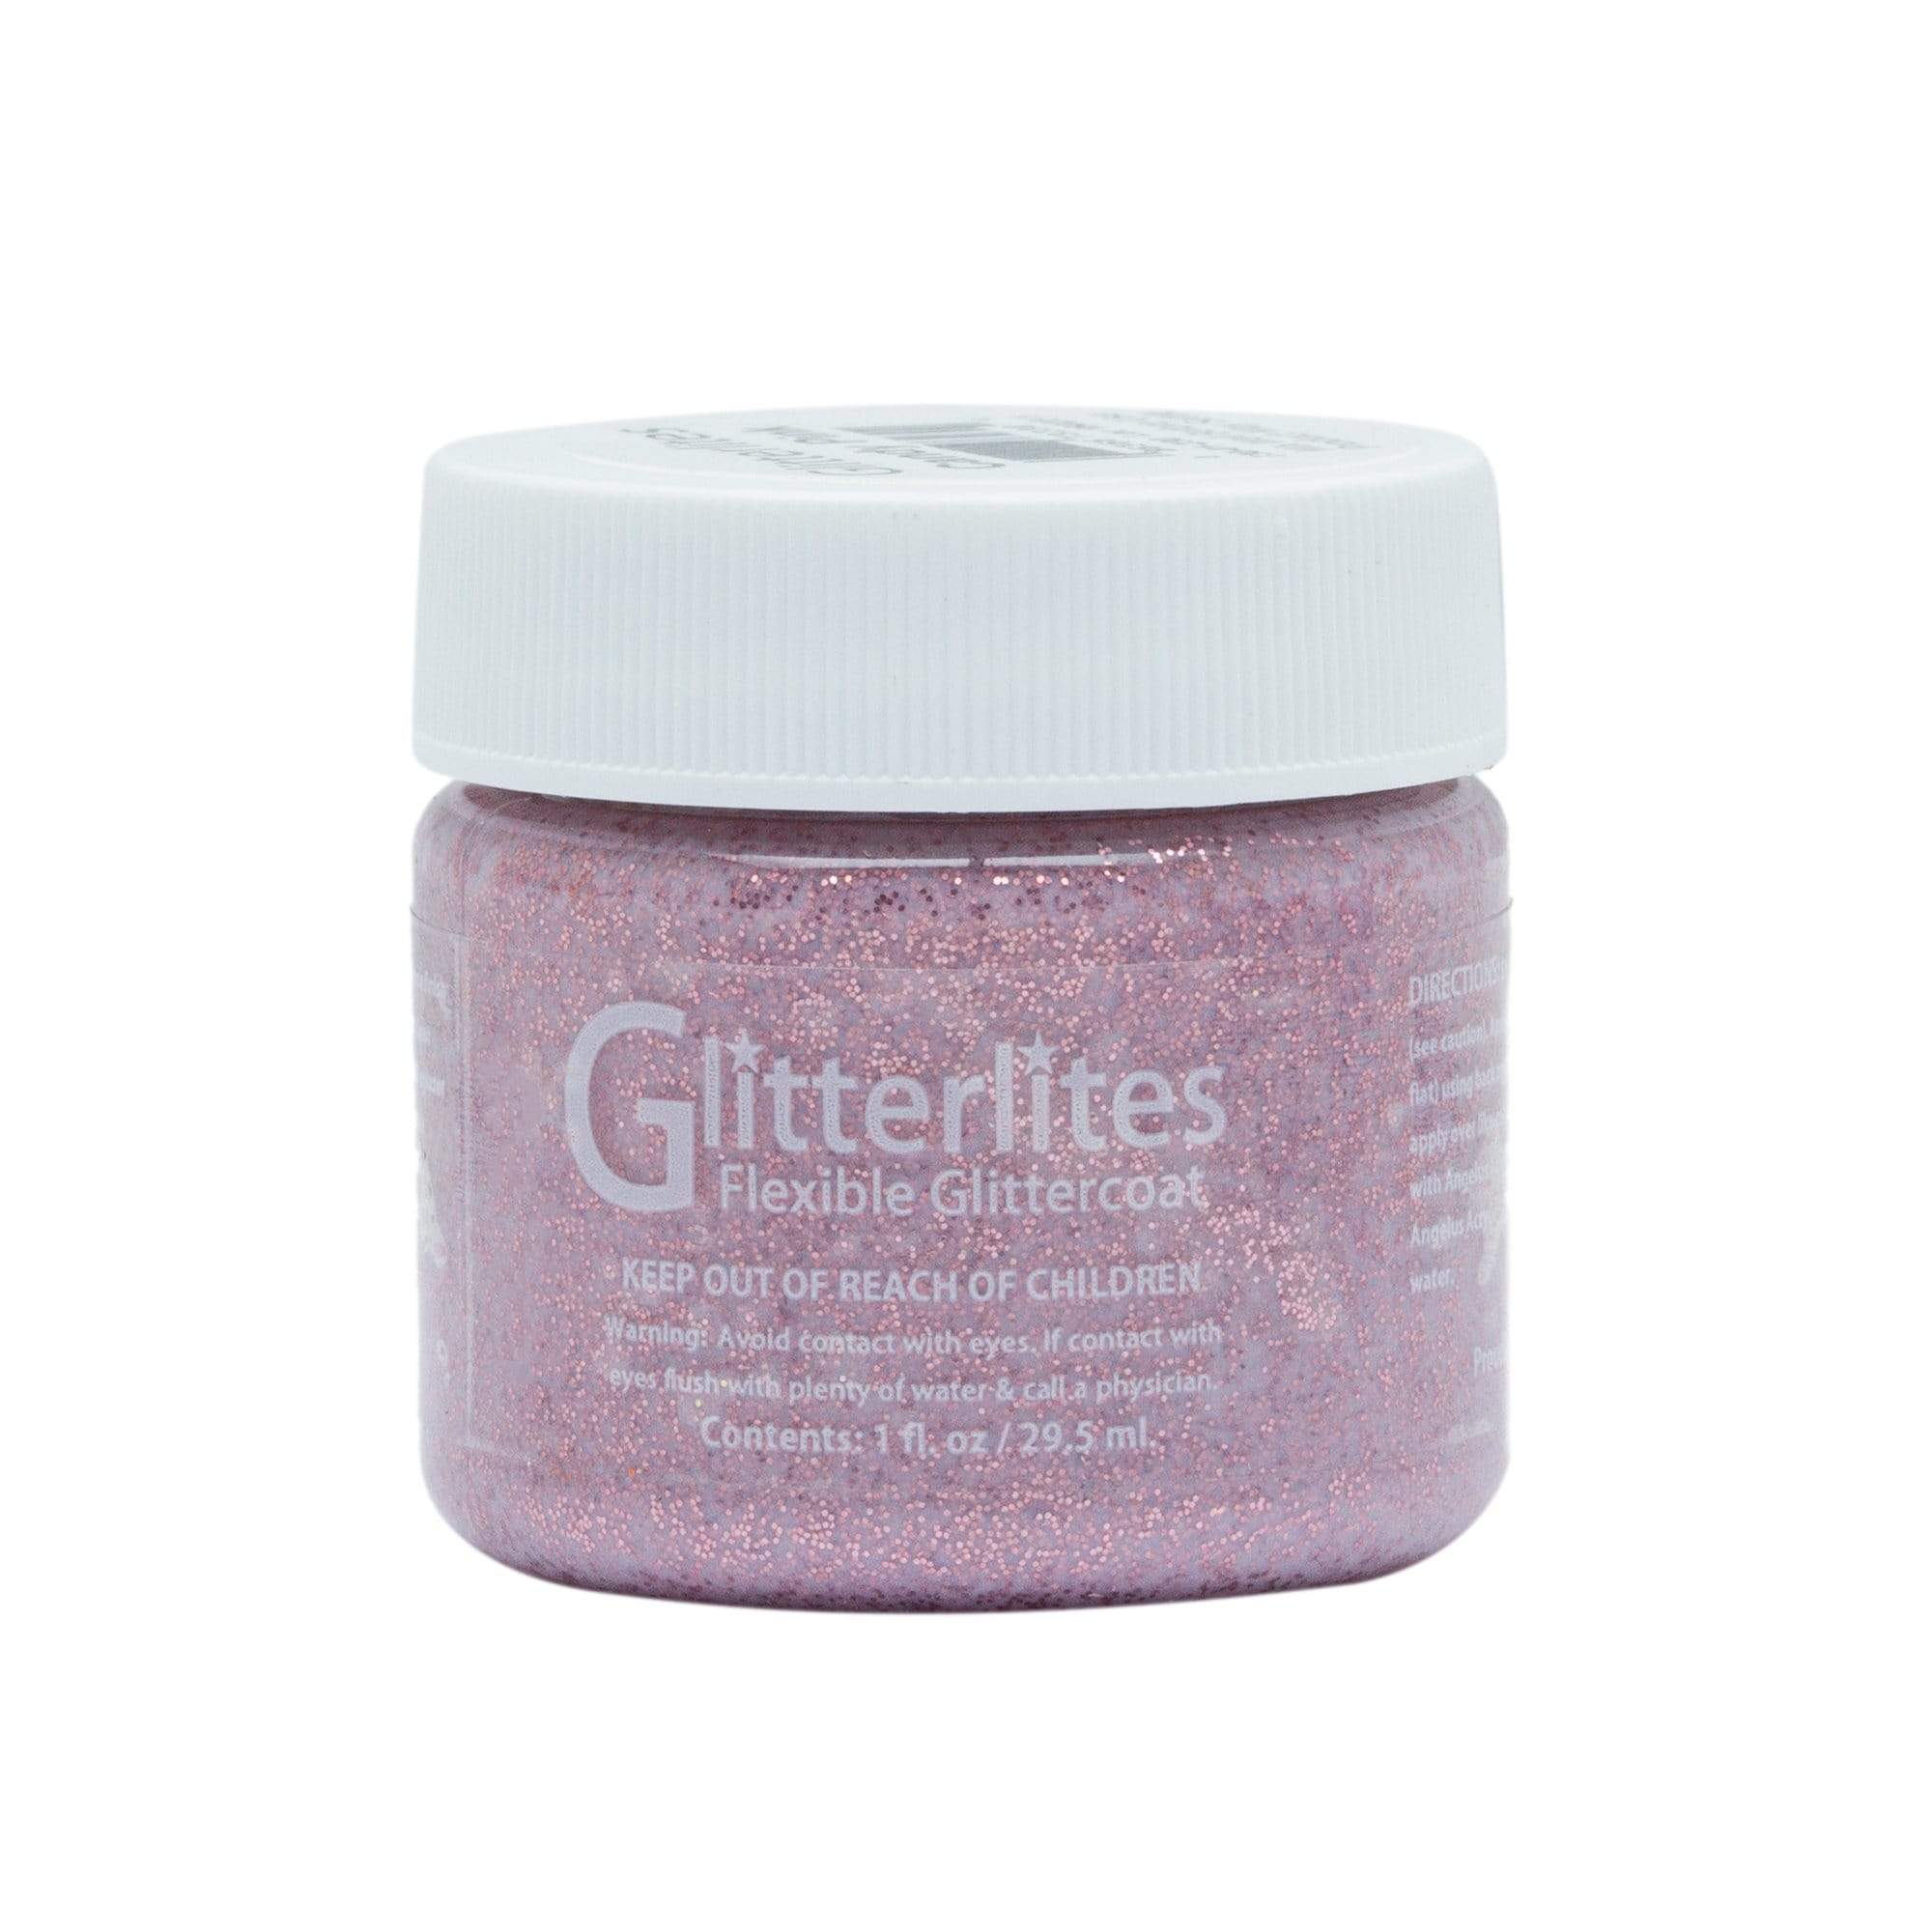 Angelus Glitterlite is great for projects that need a touch of glitter. Pick up a can of Candy Pink Glitterlite for a sweet sixteen project.